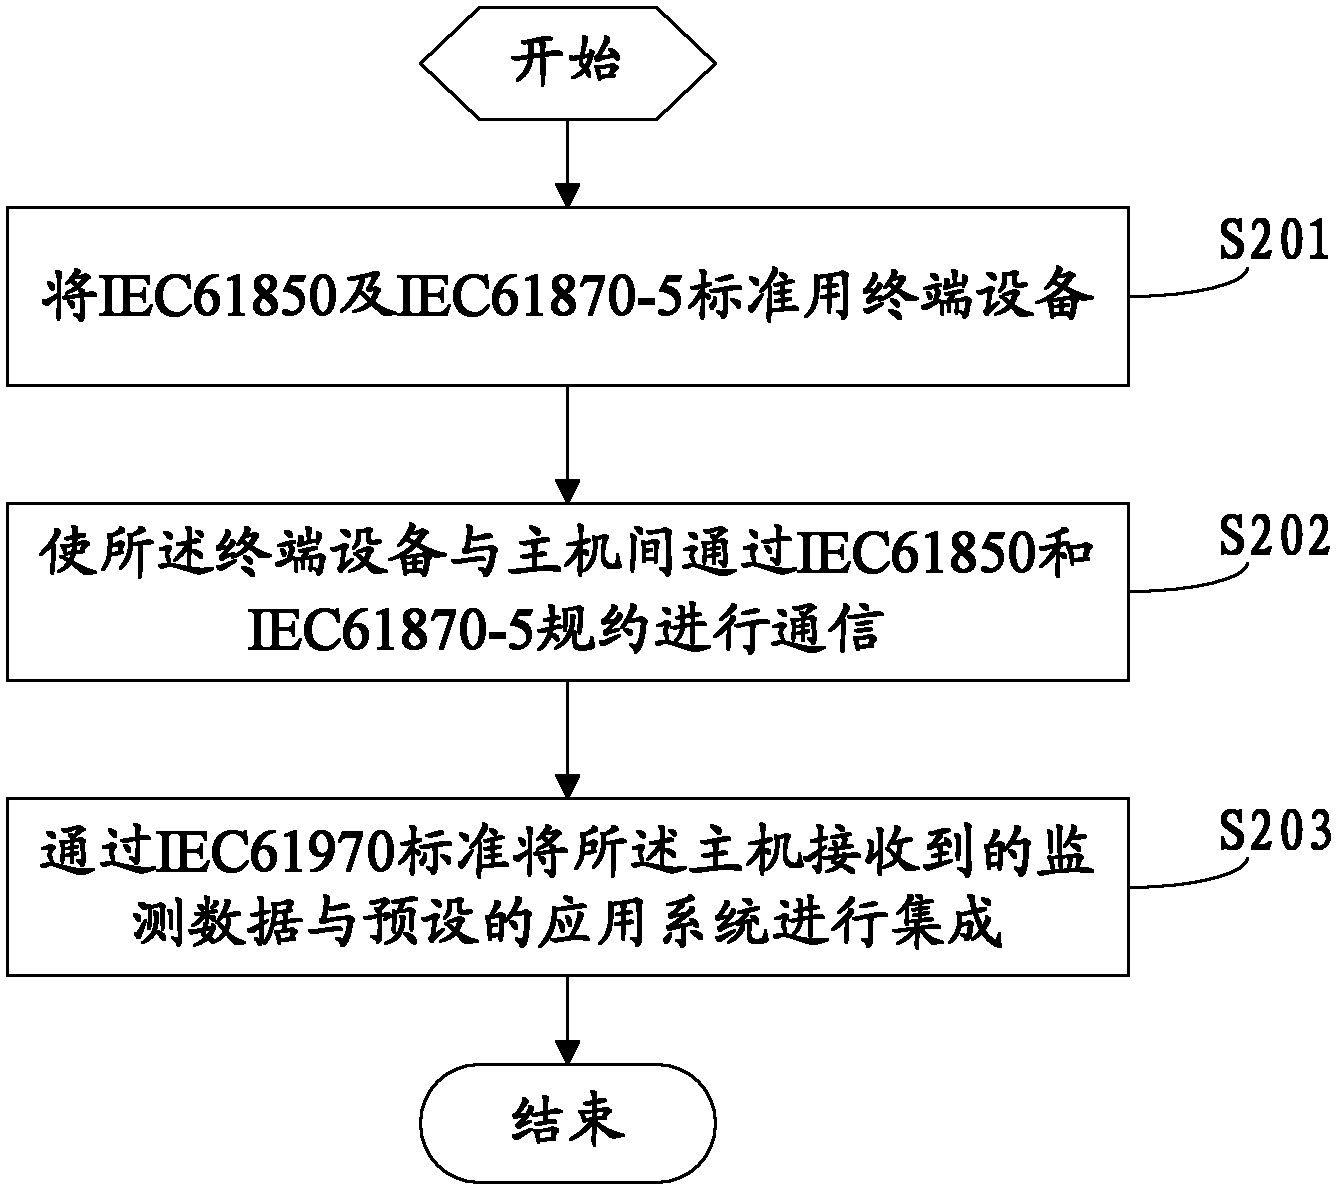 System and method for electric transmission and distribution equipment monitoring